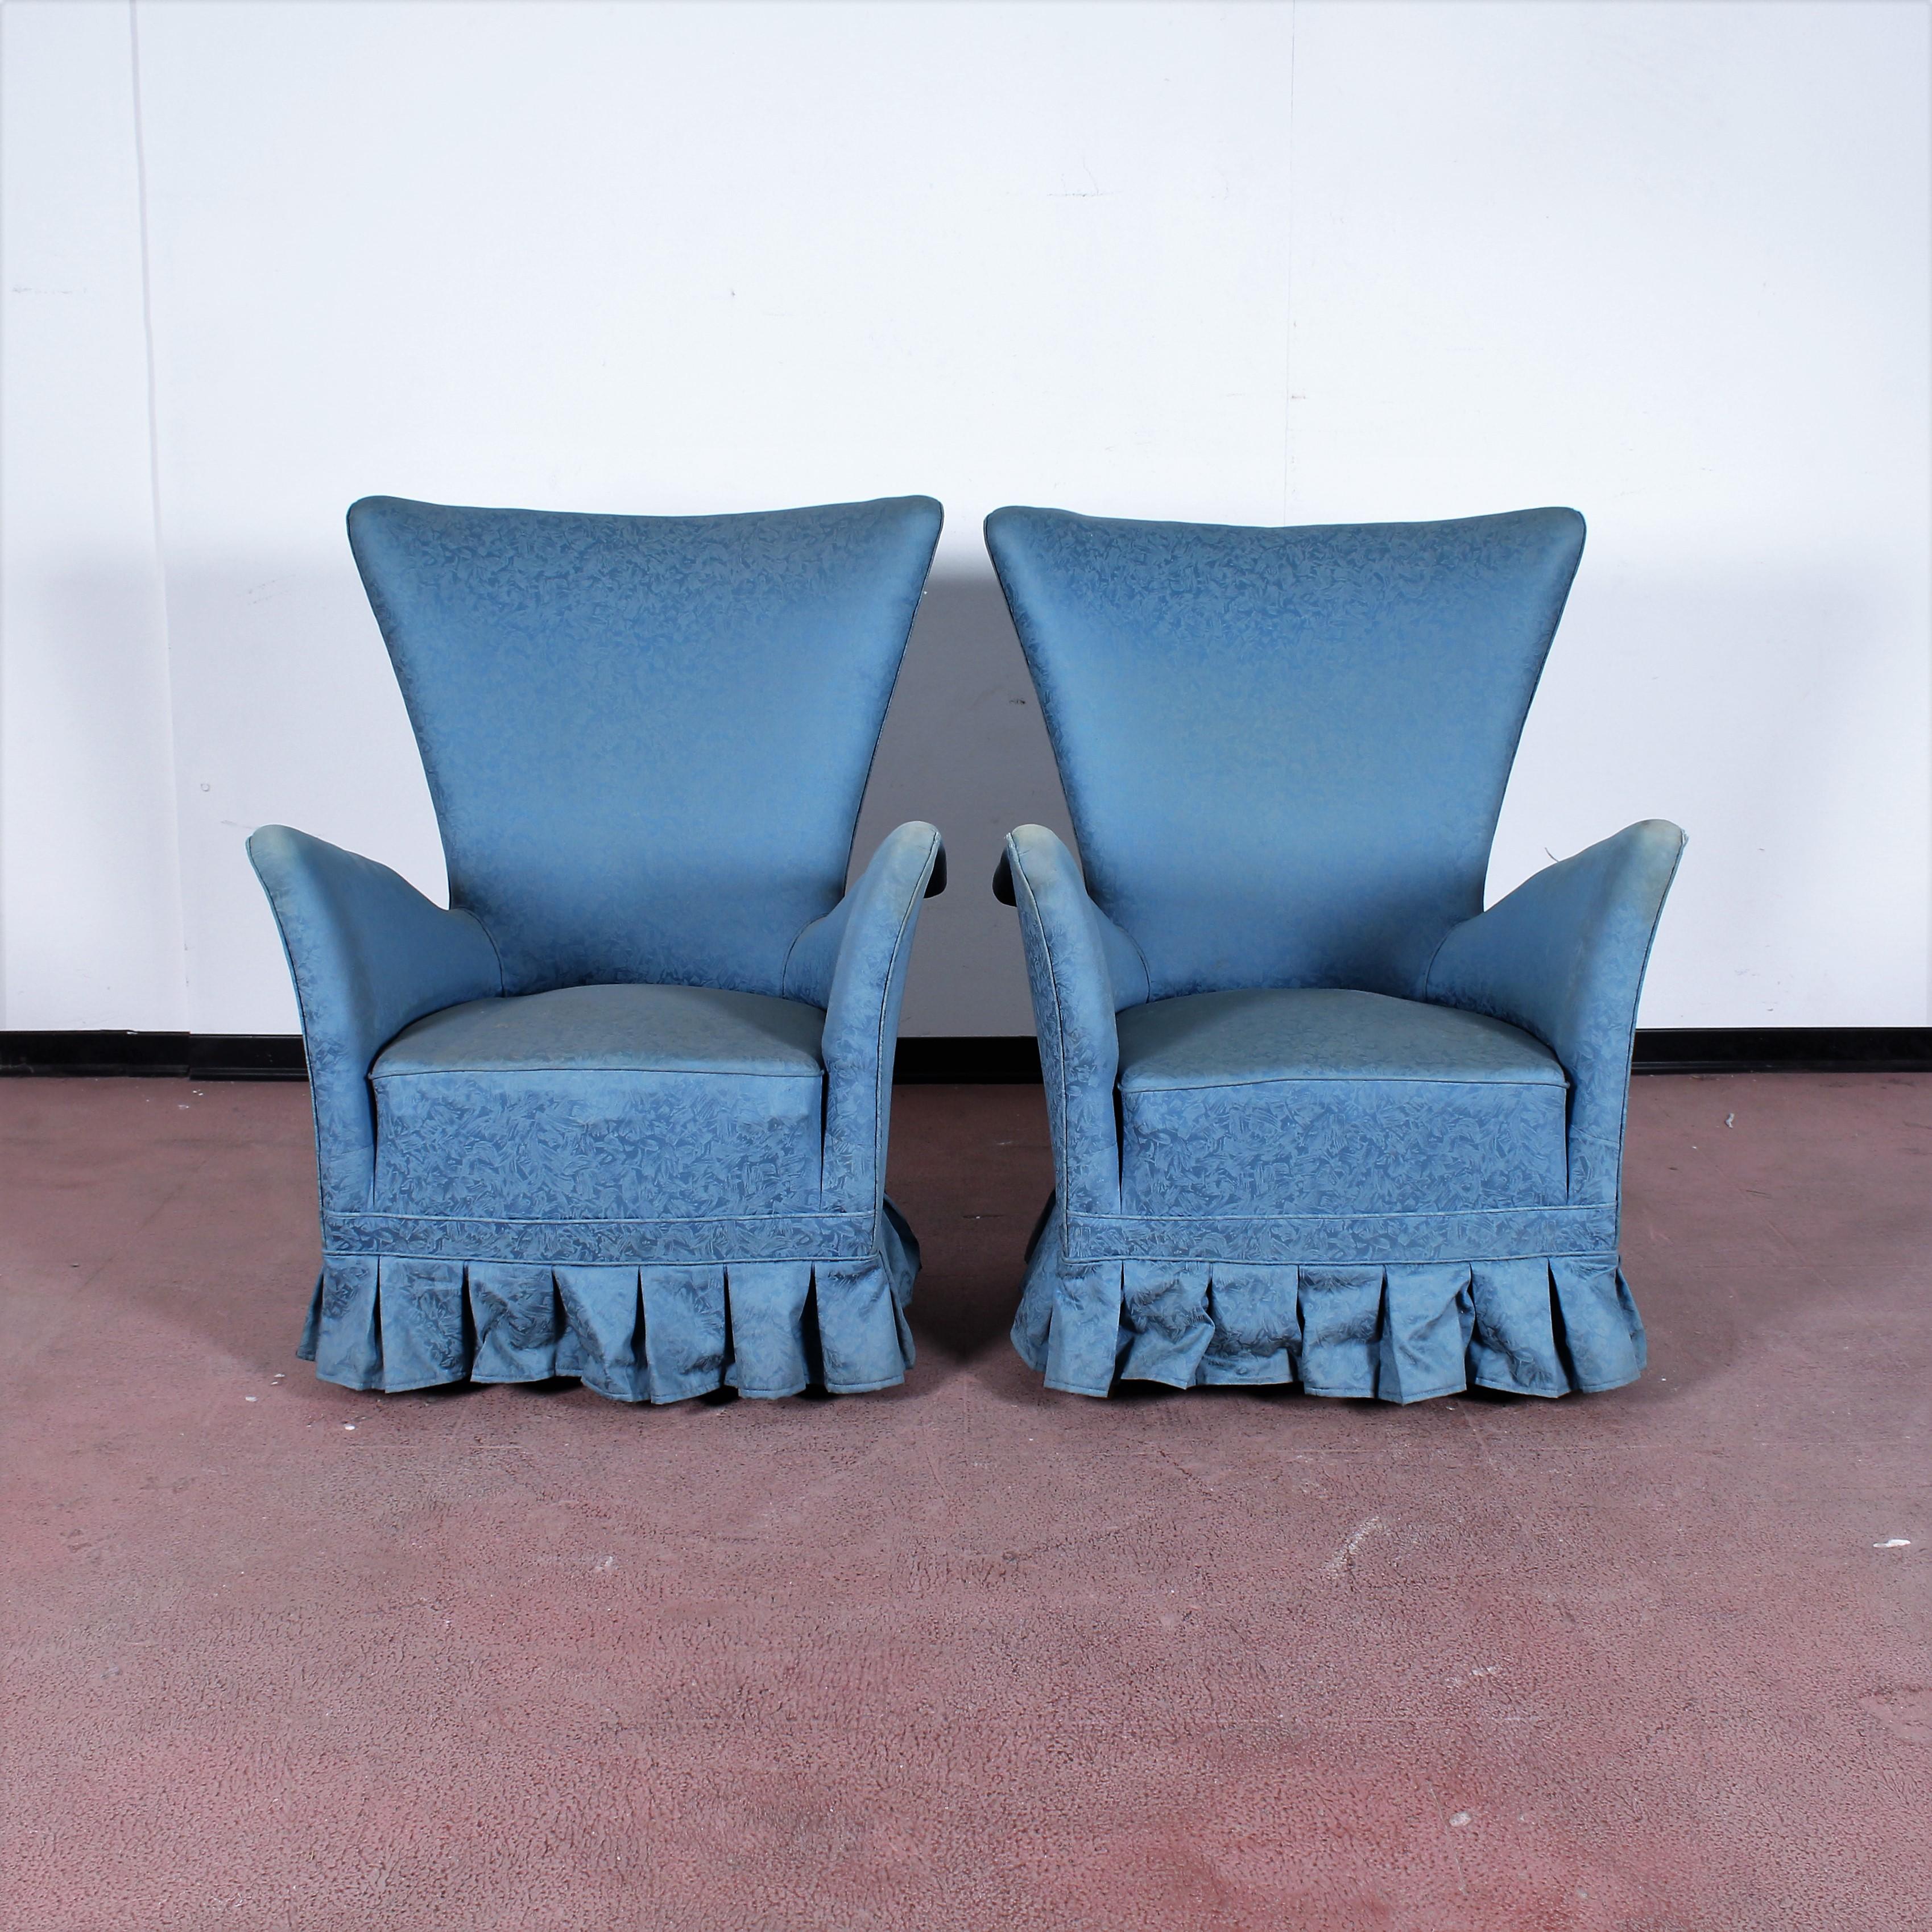 Set of two armchairs with wooden structure, blue fabric covering with relief abstract motifs, and conical feet. Gio Ponti style, Italian manufacture in 1950s
Wear consistent with age and use.
 